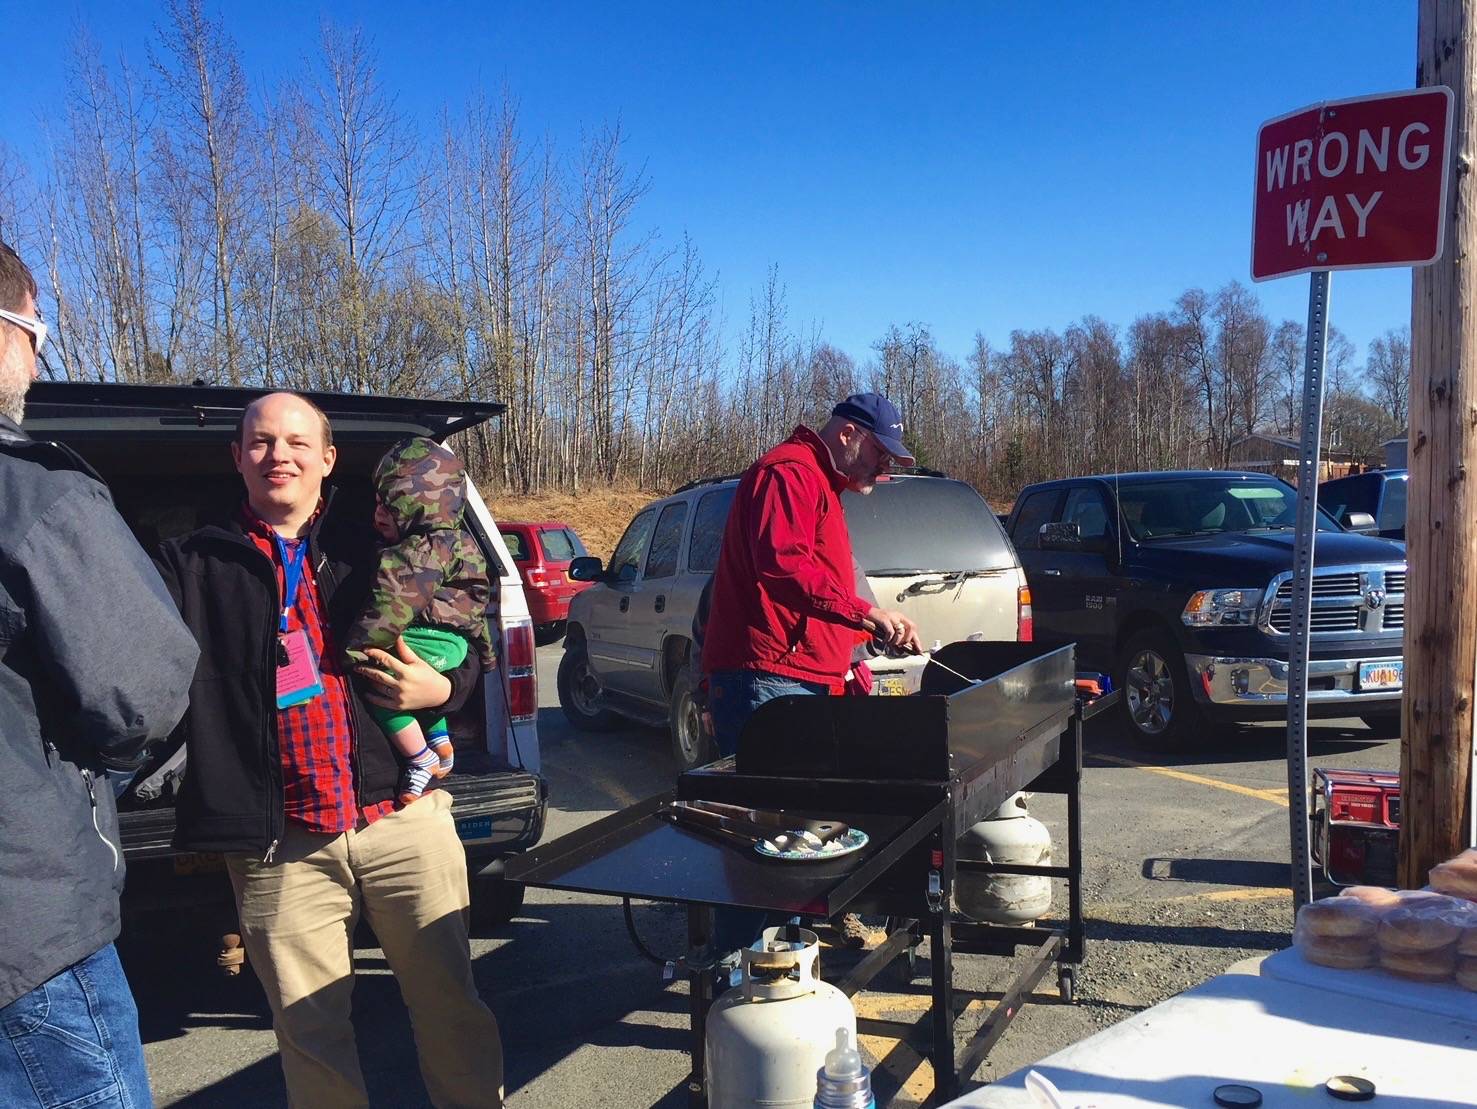 Public education supporters gather for a barbecue in the parking lot behind the George A. Navarre Borough Administration Building before the Kenai Peninsula Borough Assembly’s meeting on Tuesday, May 1, 2018 in Soldotna, Alaska. Teachers, parents and school district administrators turned out in force to ask the assembly to increase funding to the Kenai Peninsula Borough School District on Tuesday. The assembly agreed to at least provide as much funding as it did in fiscal year 2018, but with a deficit in the borough budget, the source of the funding is still unclear. (Photo by Elizabeth Earl/Peninsula Clarion)